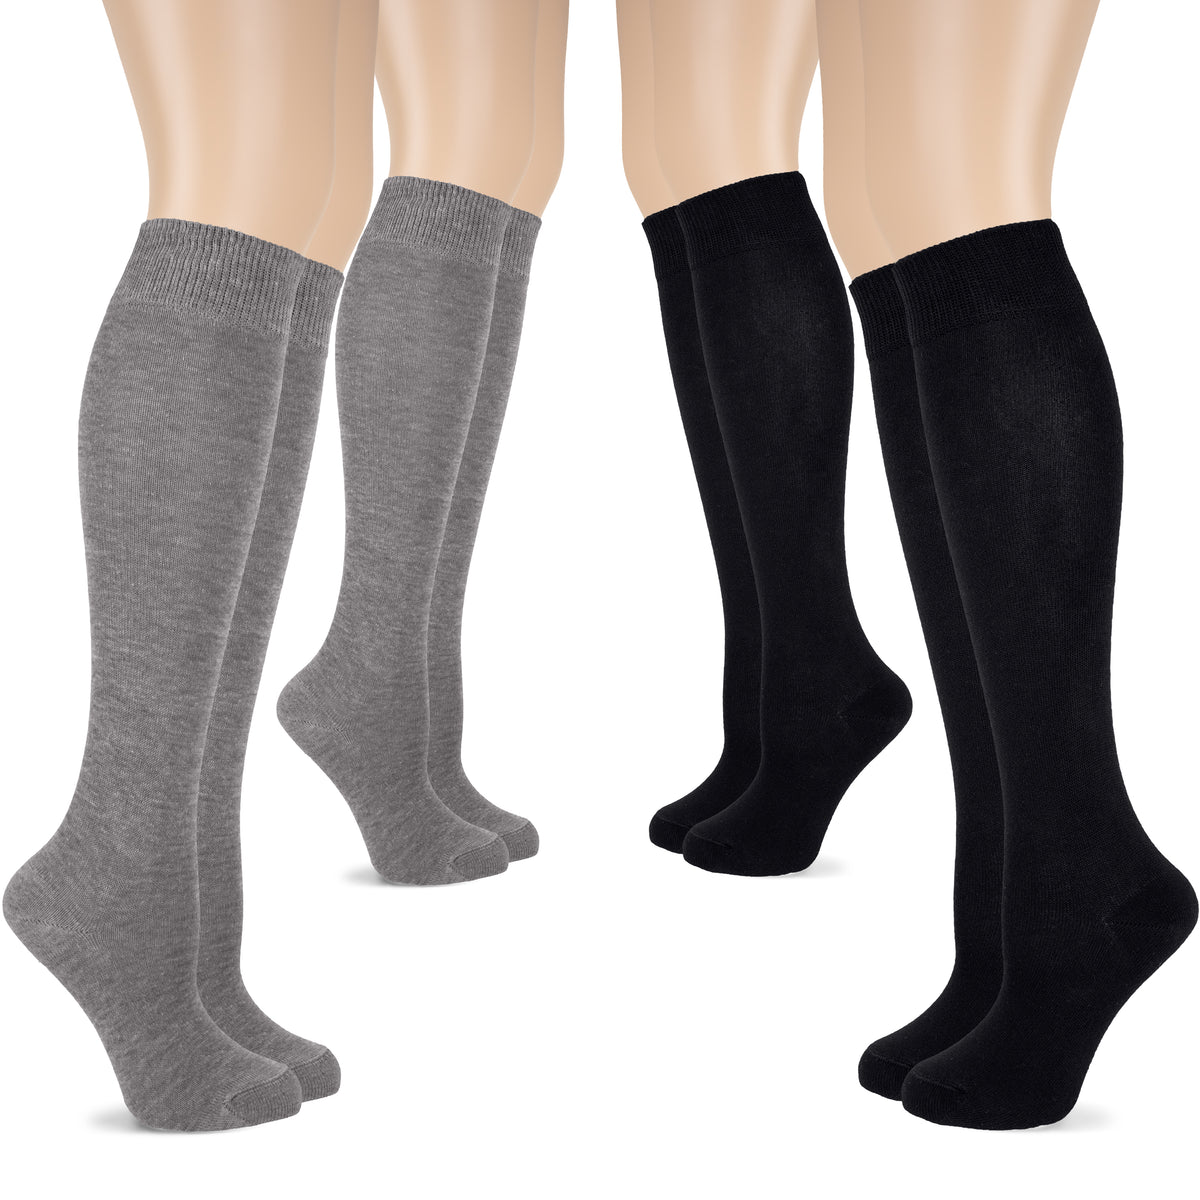 This image depicts four pairs of women's knee-high cotton socks in gray and black colors.